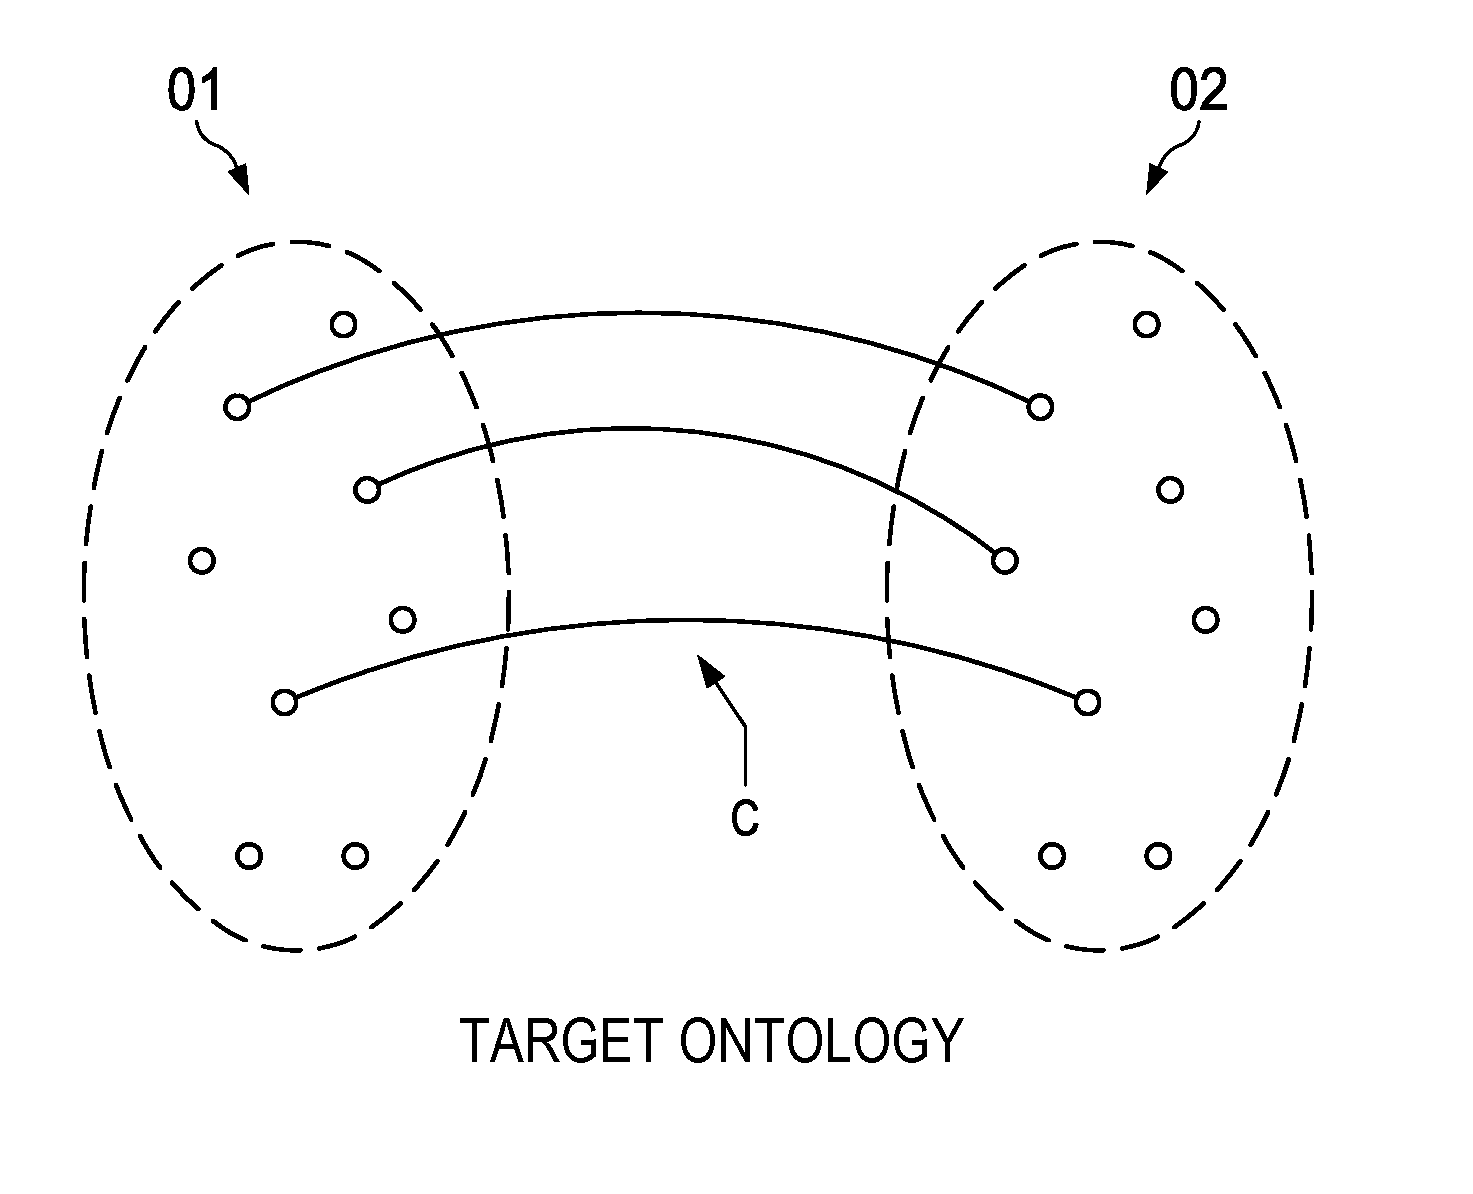 Method of composing an ontology alignment